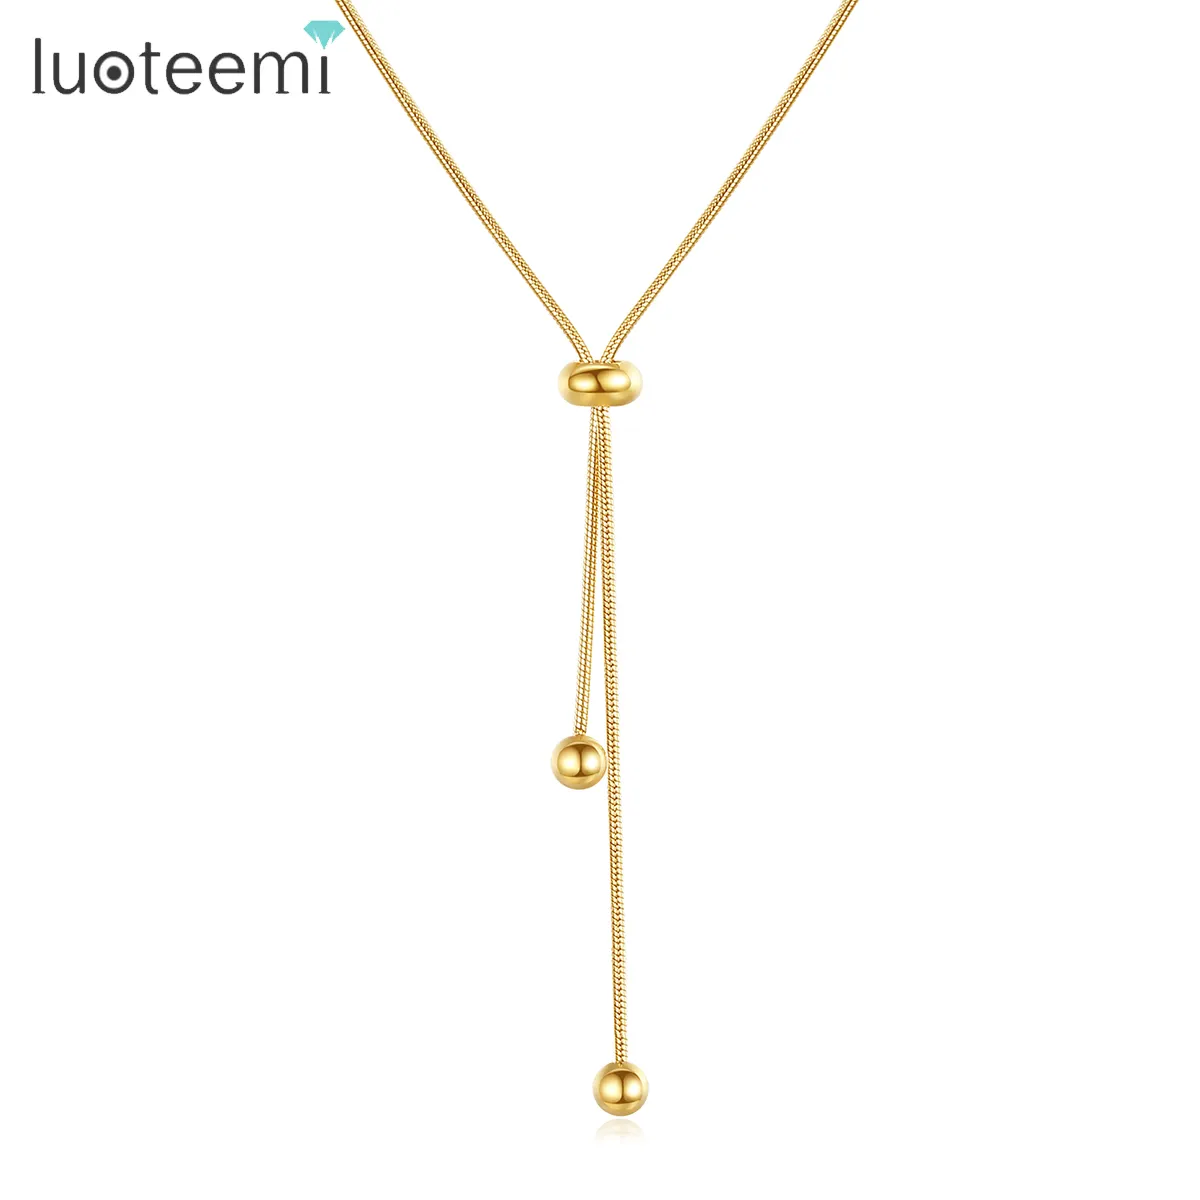 SP-LAM Stainless Steel Gold Charm Pendant Snake Chain Woman Jewelry Designer Ball Chain Necklace